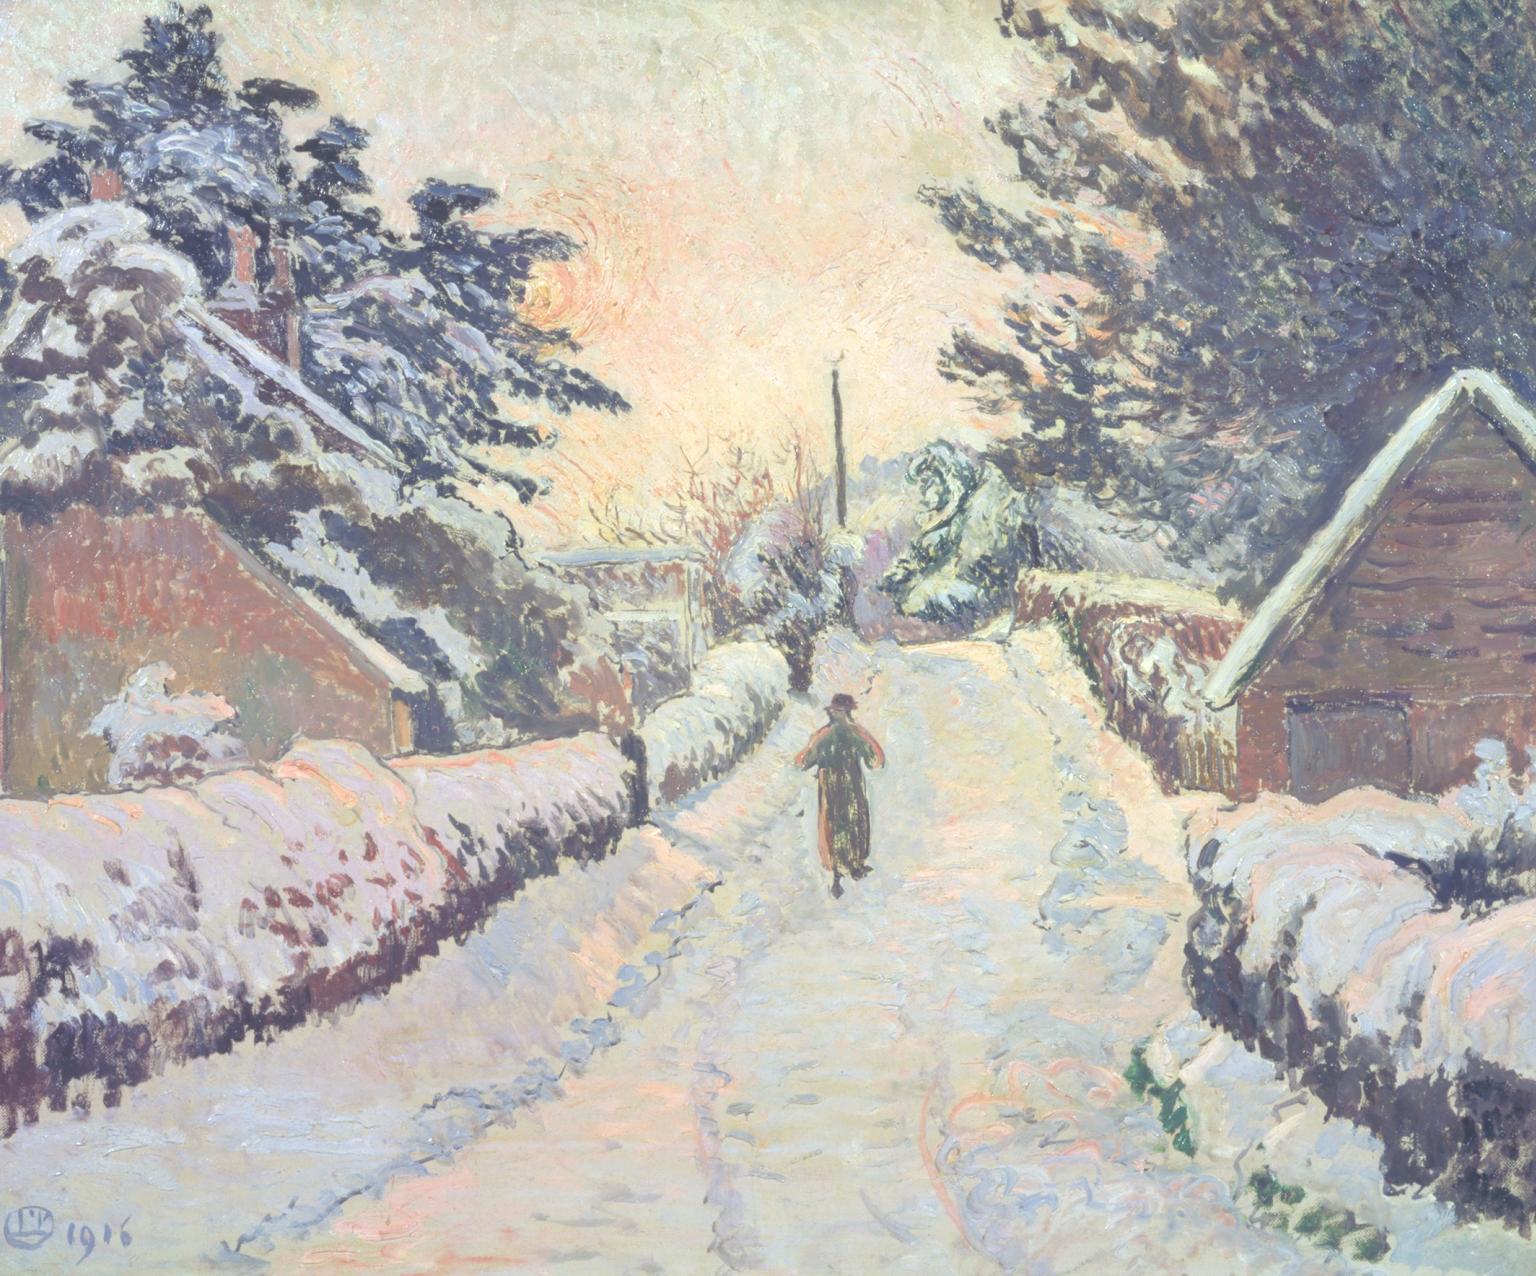 Ivy Cottage, Coldharbour: Sun and Snow by Lucien Pissarro - 1916 - 53 × 64,4 cm Tate Modern